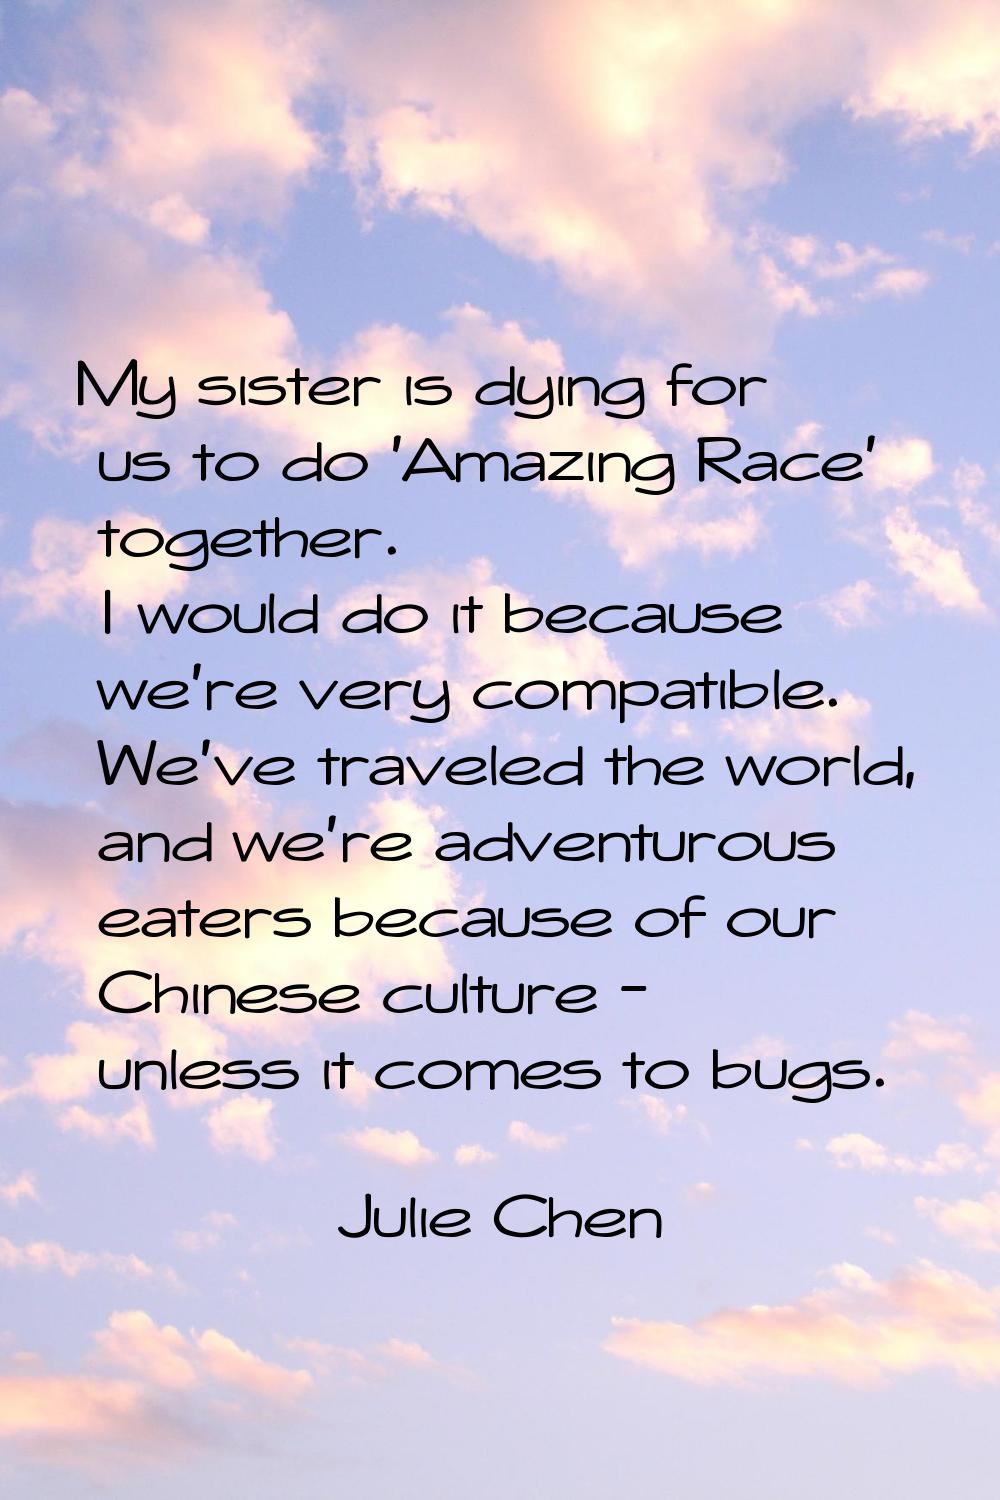 My sister is dying for us to do 'Amazing Race' together. I would do it because we're very compatibl